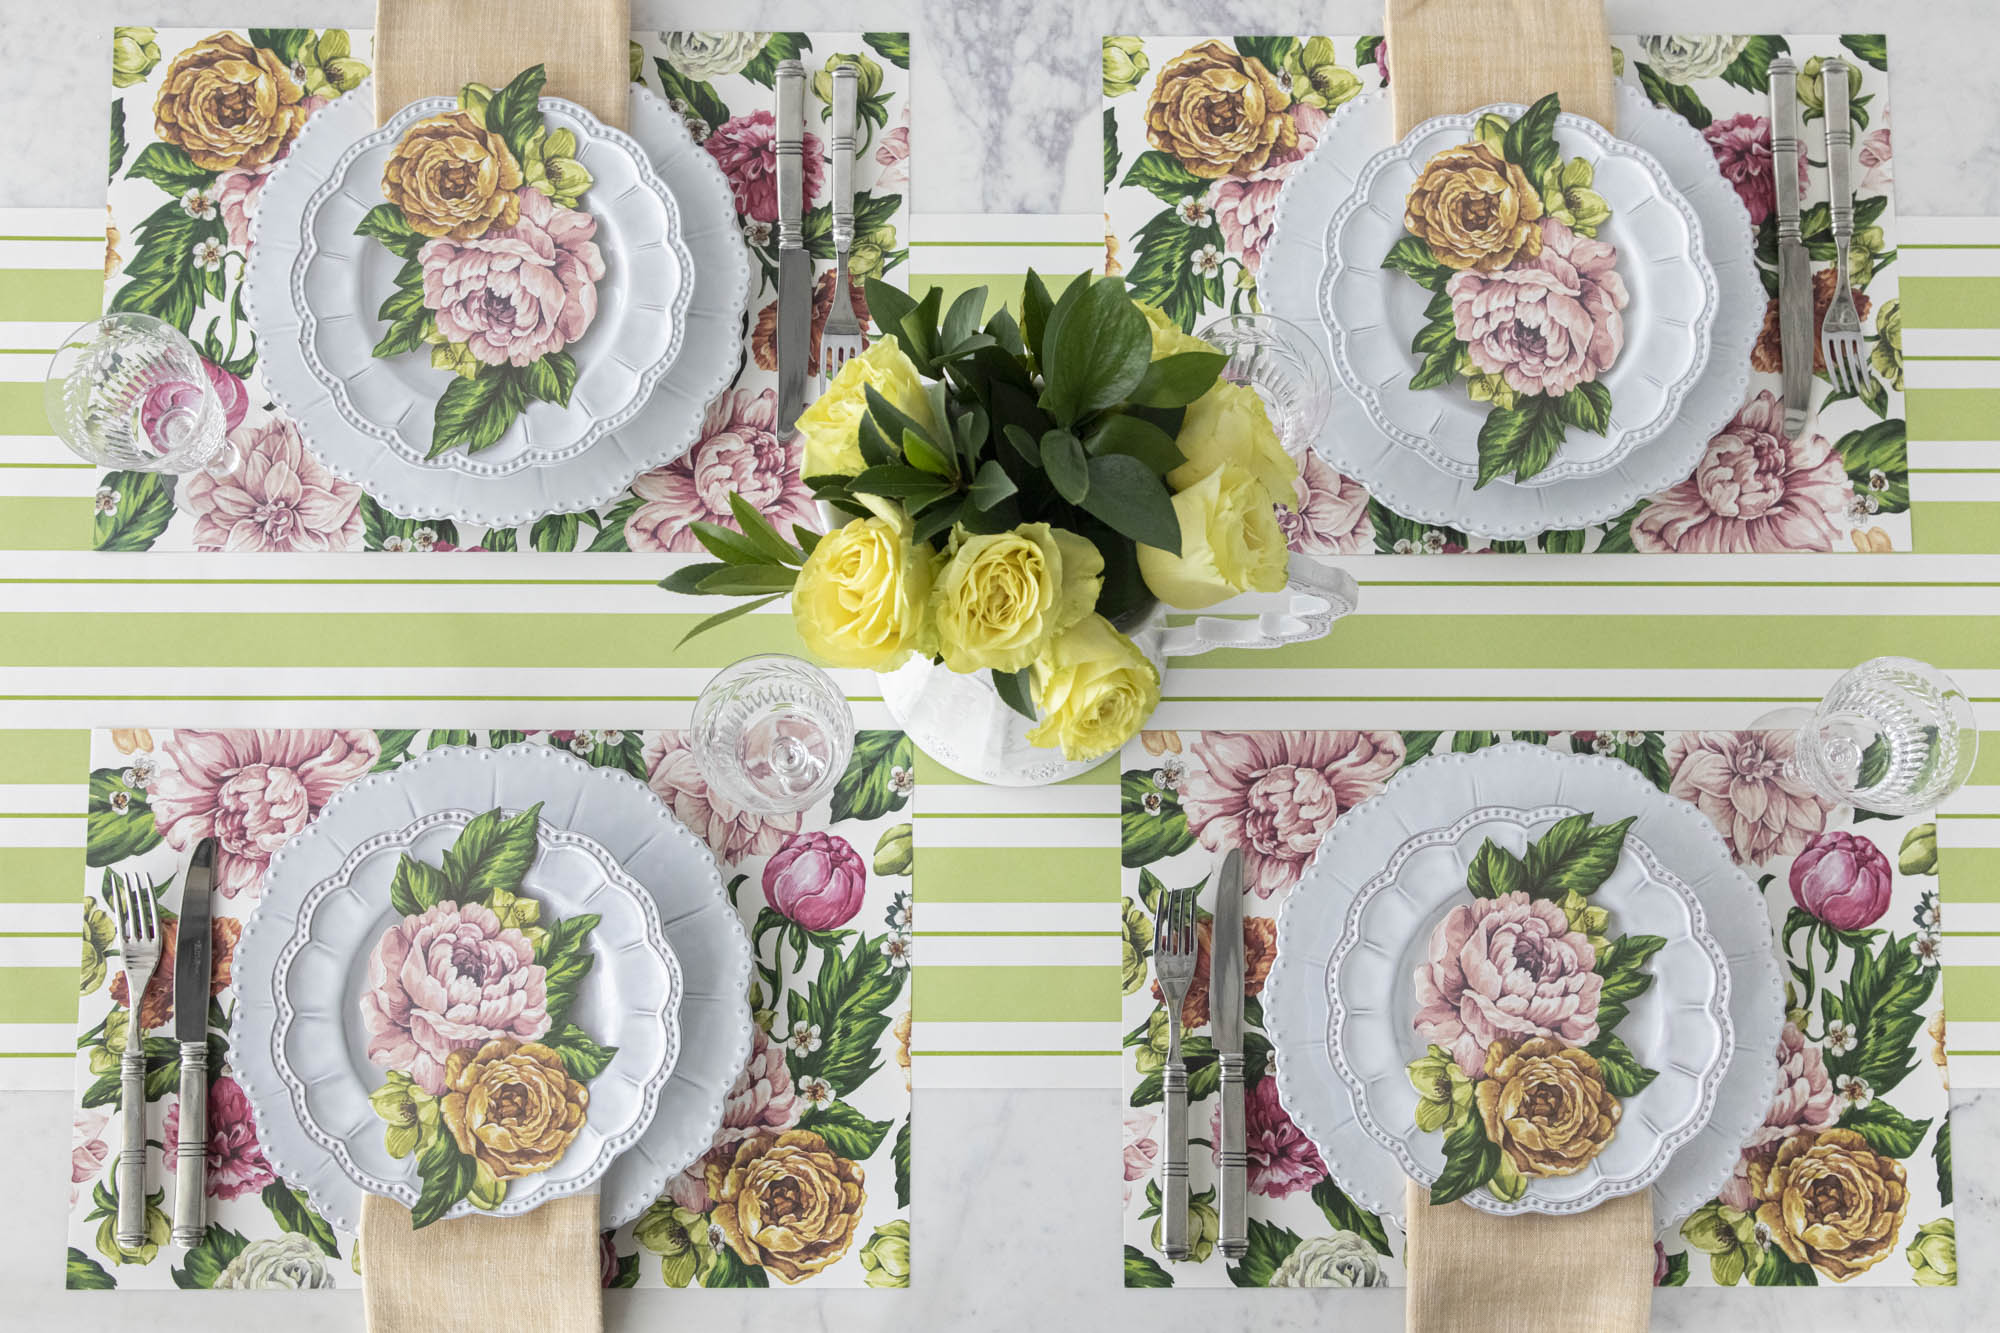 The Garden Cascade Placemat under an elegant table setting for four, from above.